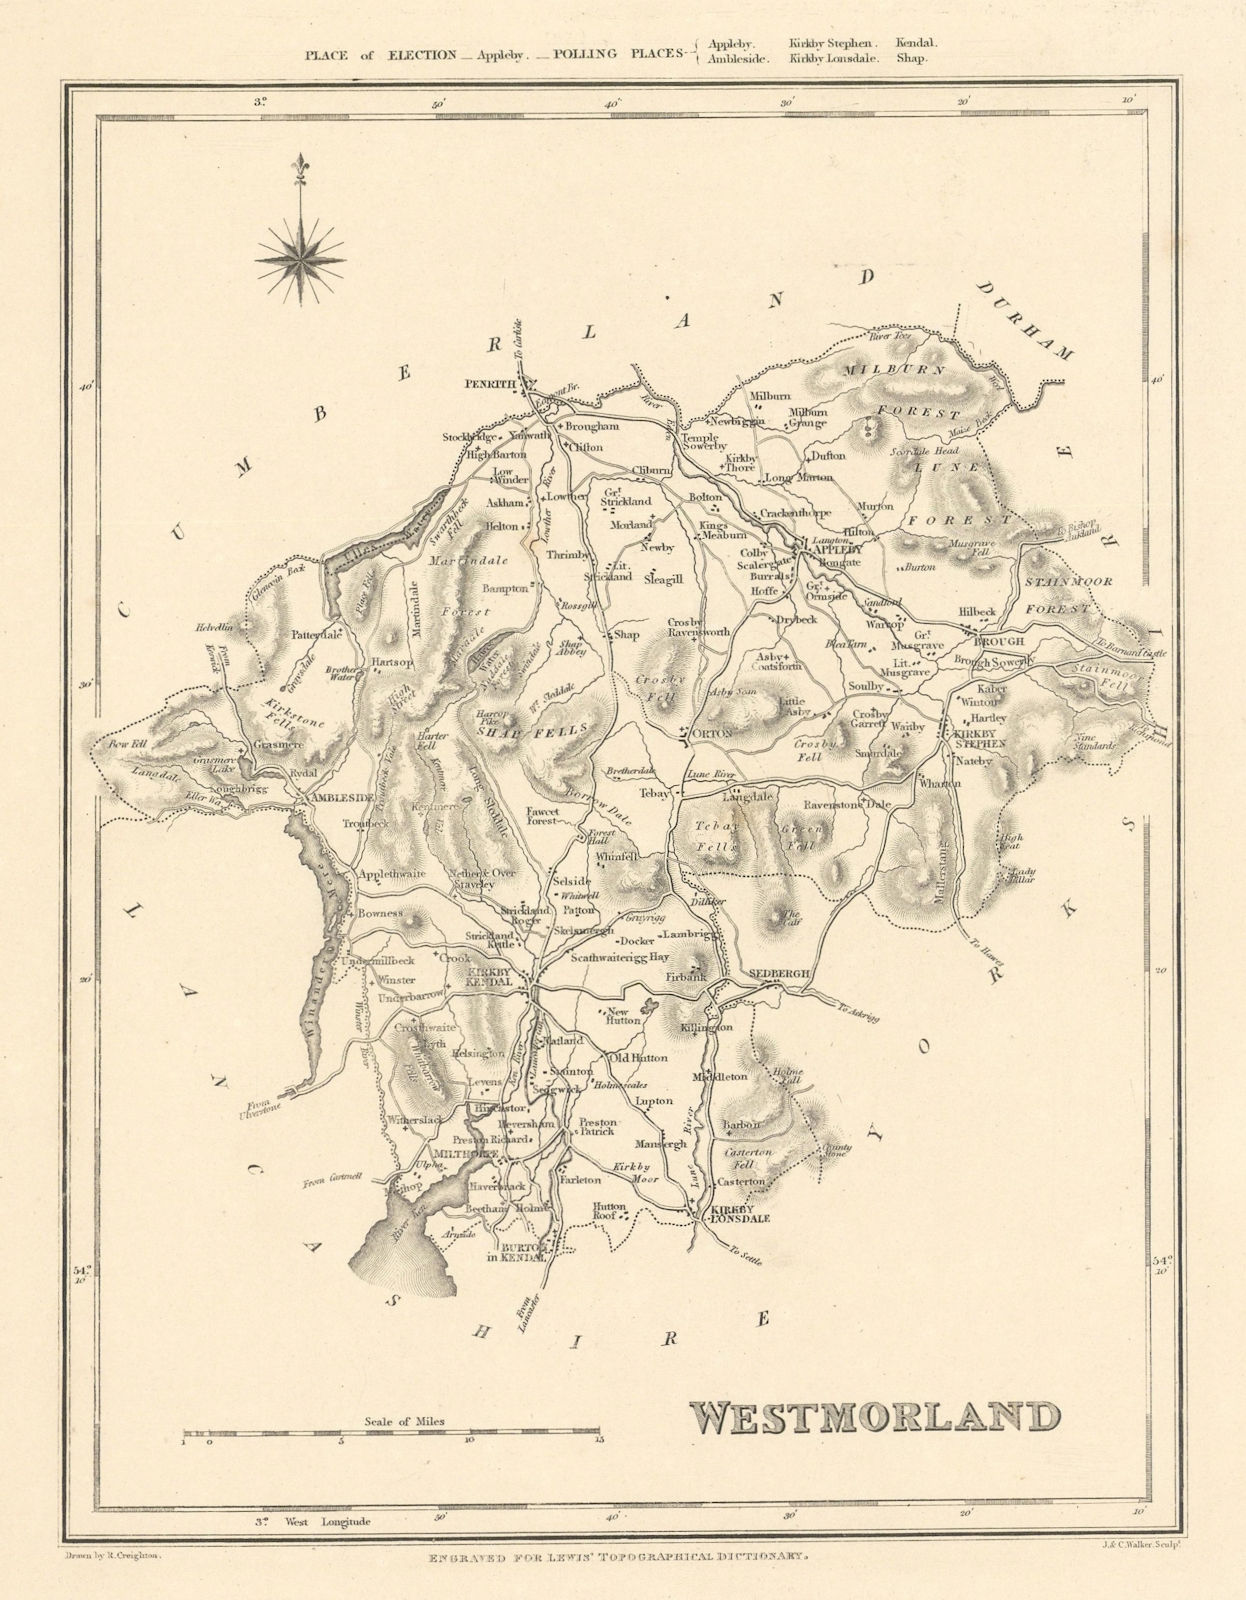 Associate Product Antique county map of WESTMORLAND by Walker Creighton Lewis. Lake District c1840